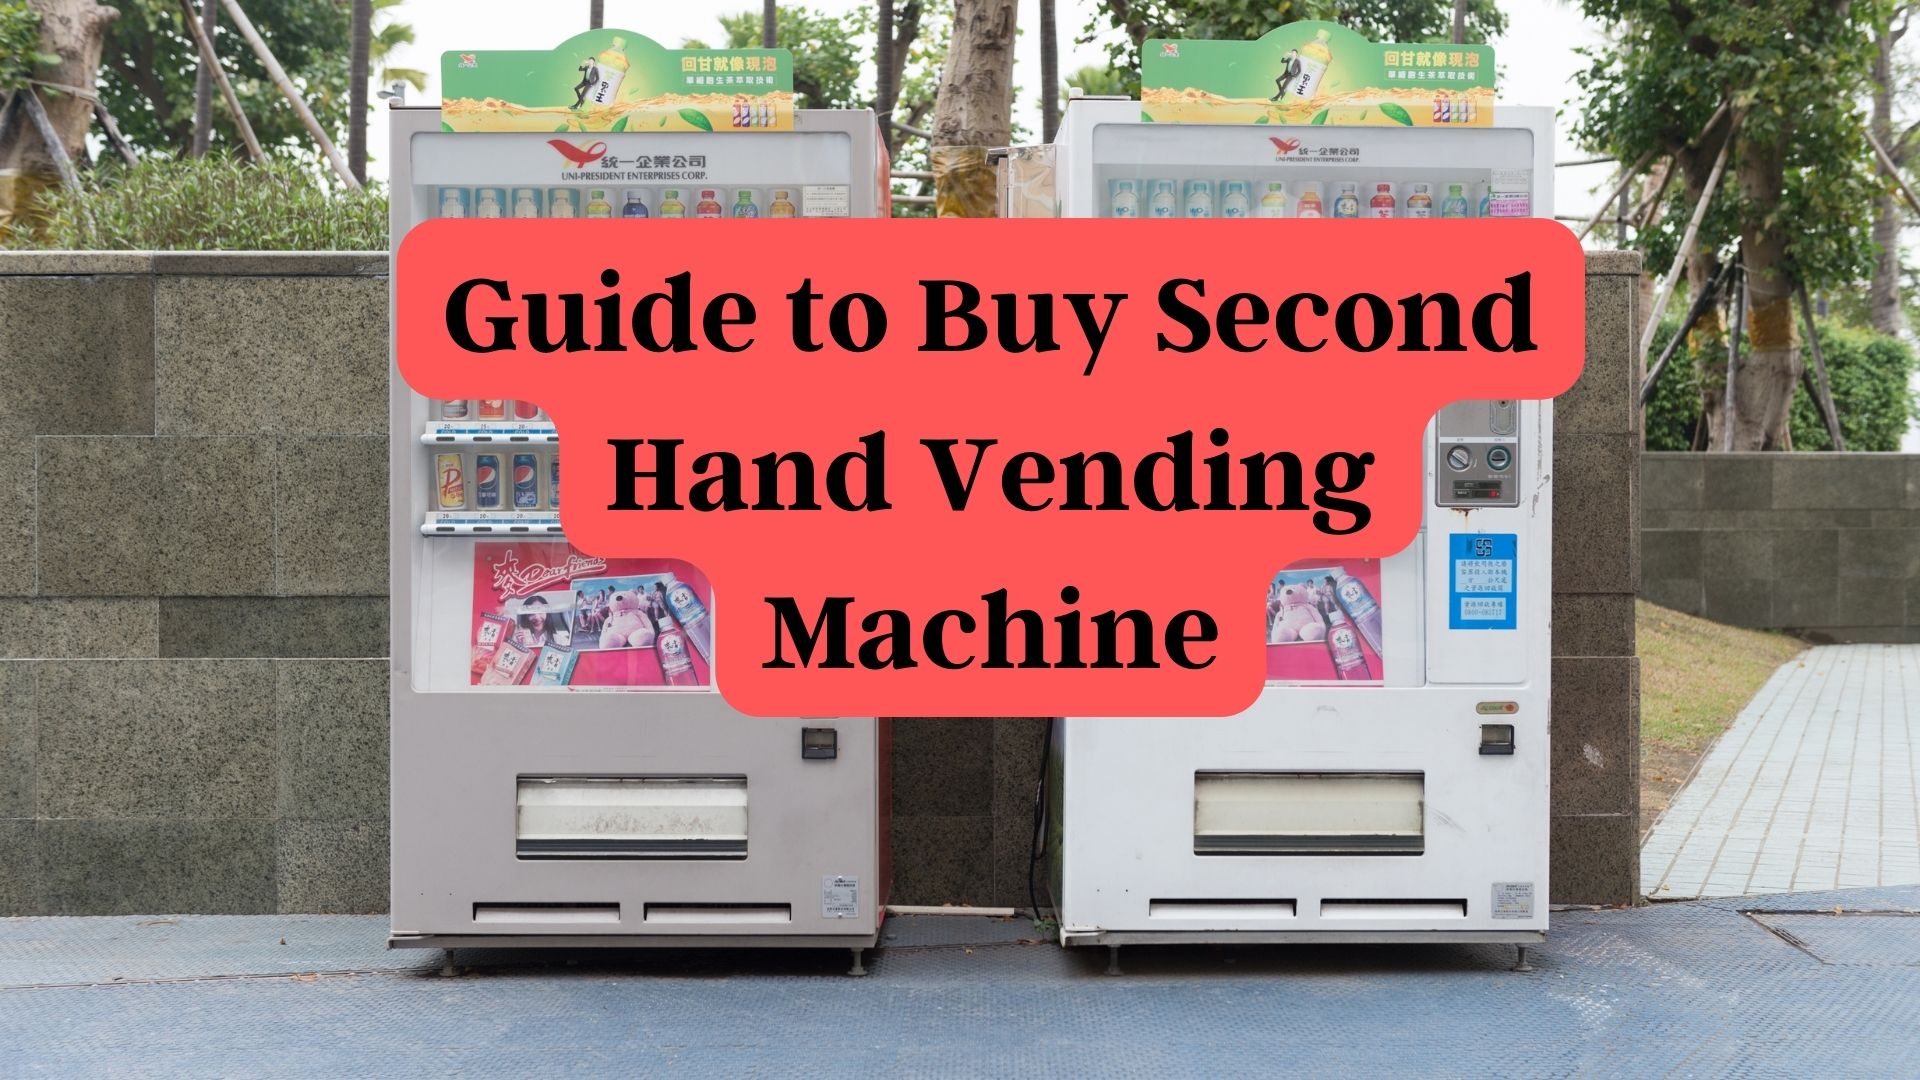 Must read this before buying second hand vending machine